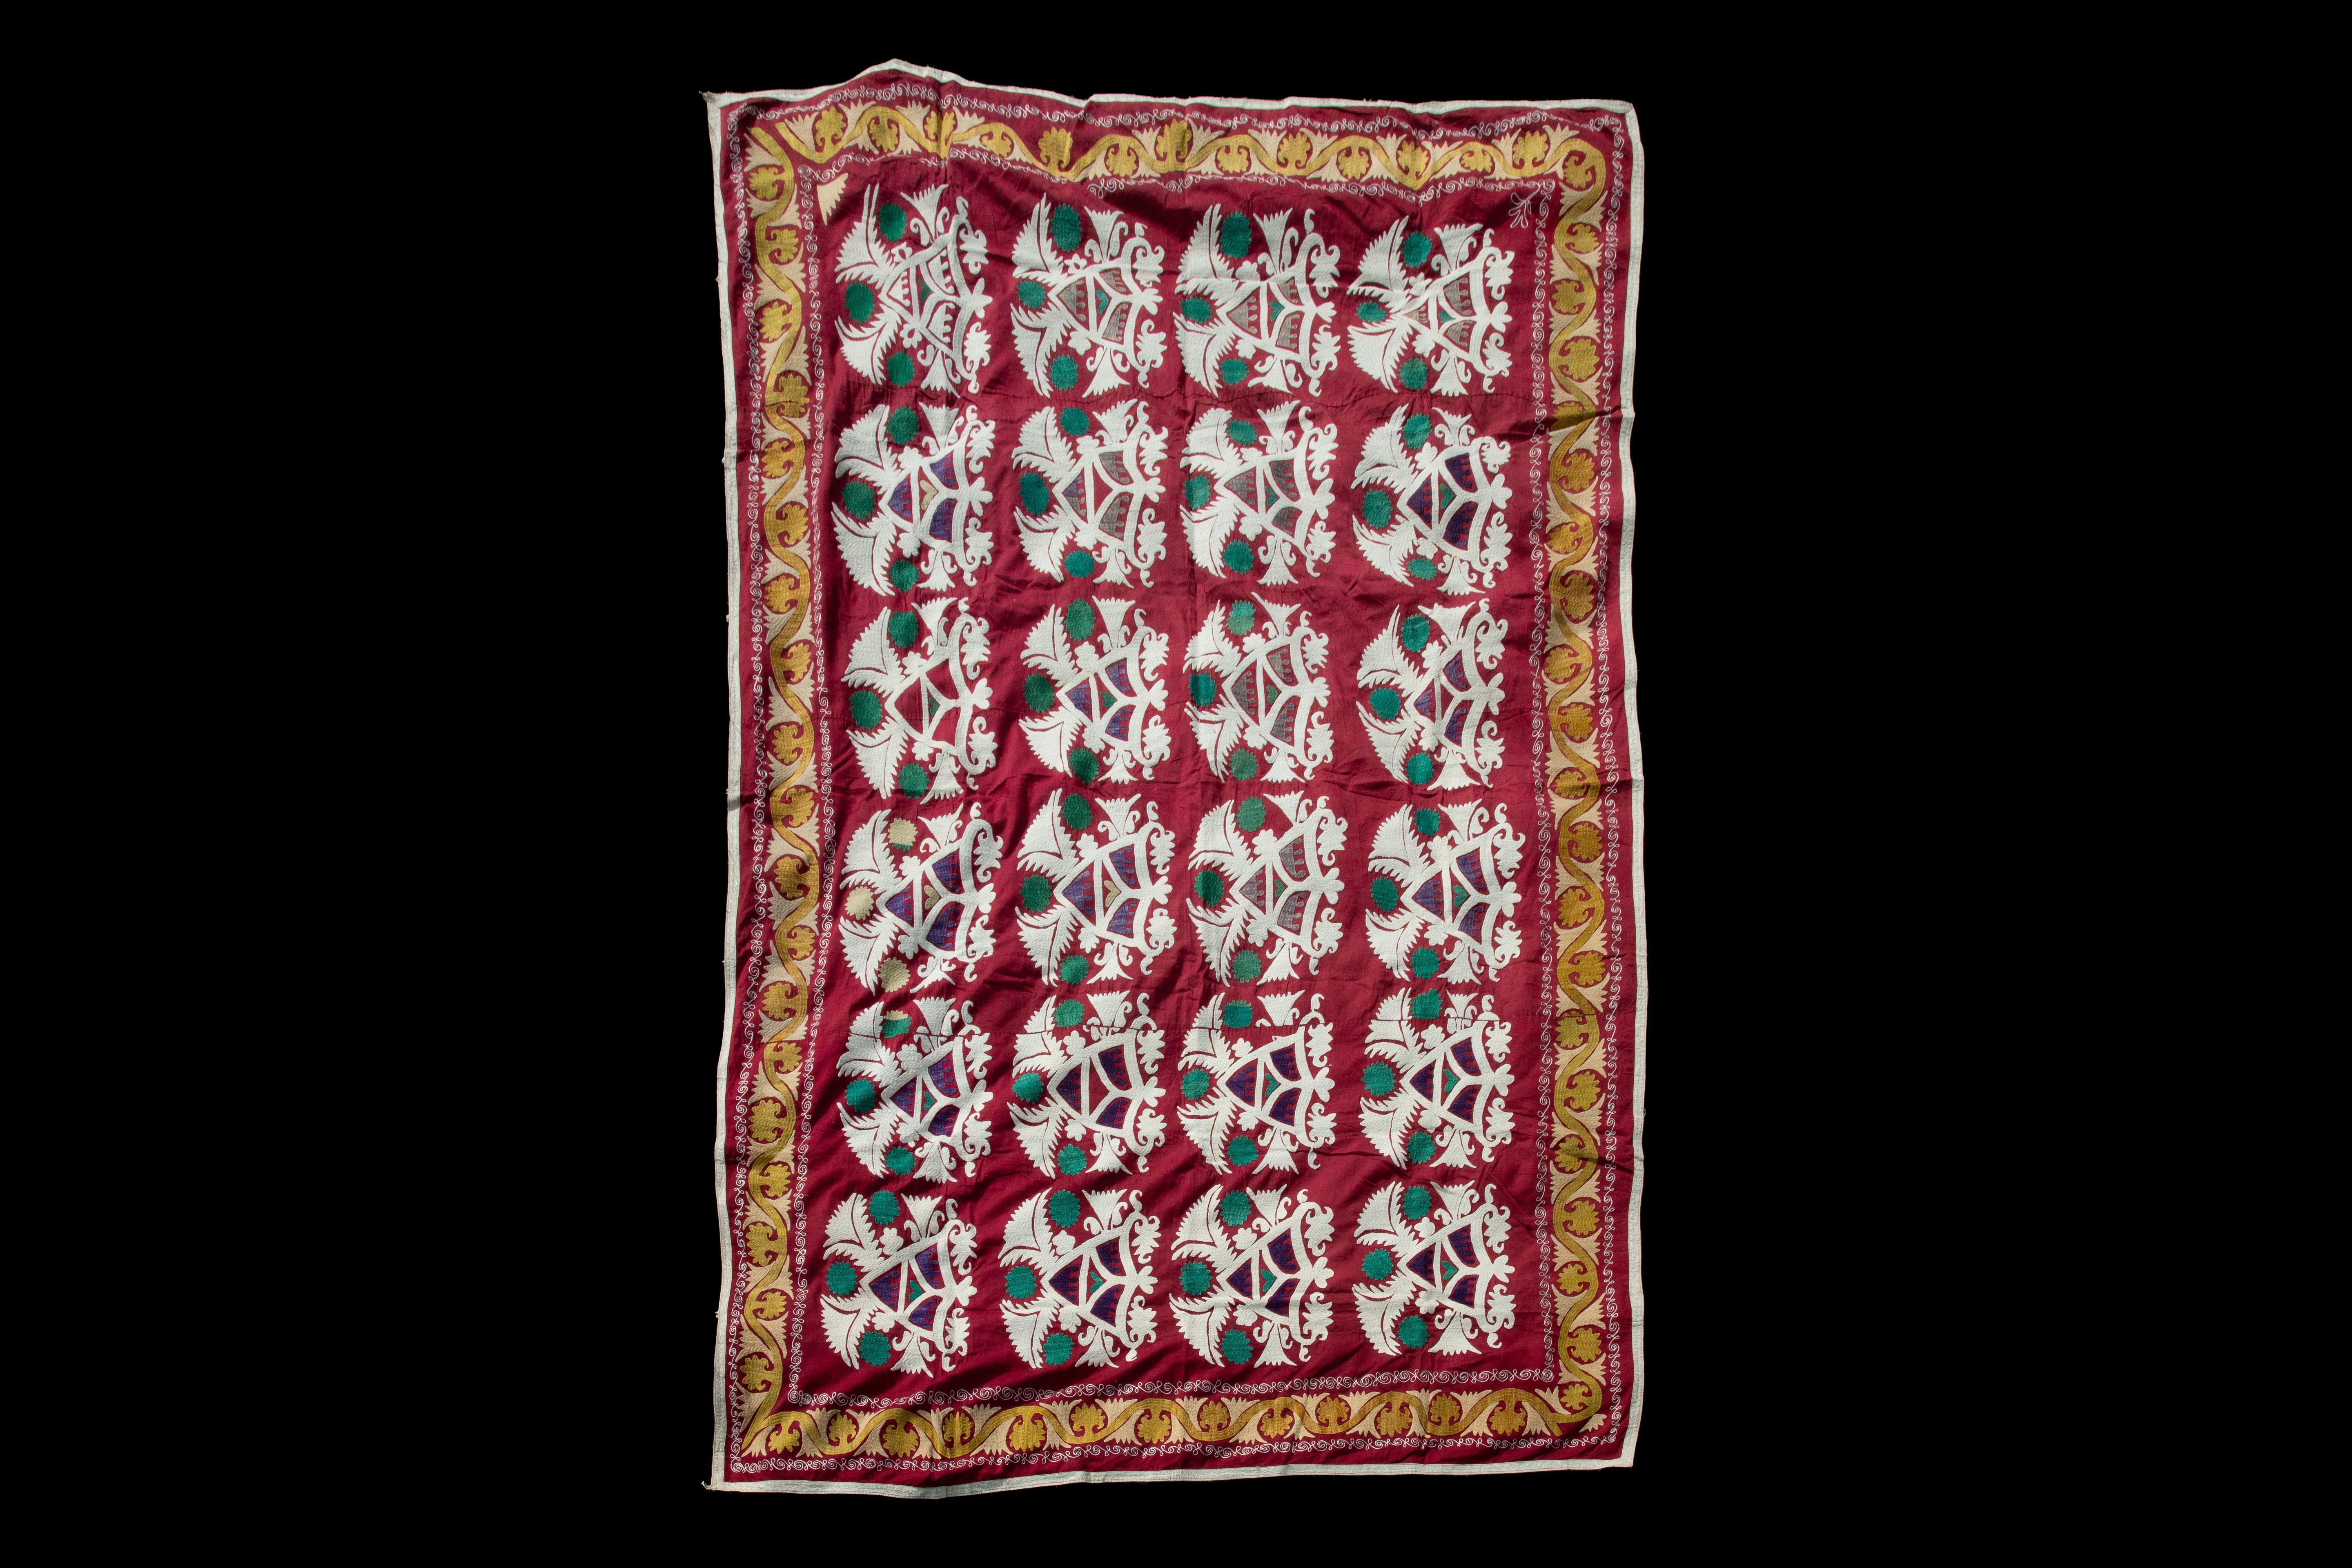 Handmade Vintage Cotton Suzani, Red, White, and Orange

Richly hand-embroidered vintage Uzbek suzani in iconic black and copper oranges.
Sun burst flowers are ringed with black scrolls on natural cotton.
Cotton embroidery in tight stitches give